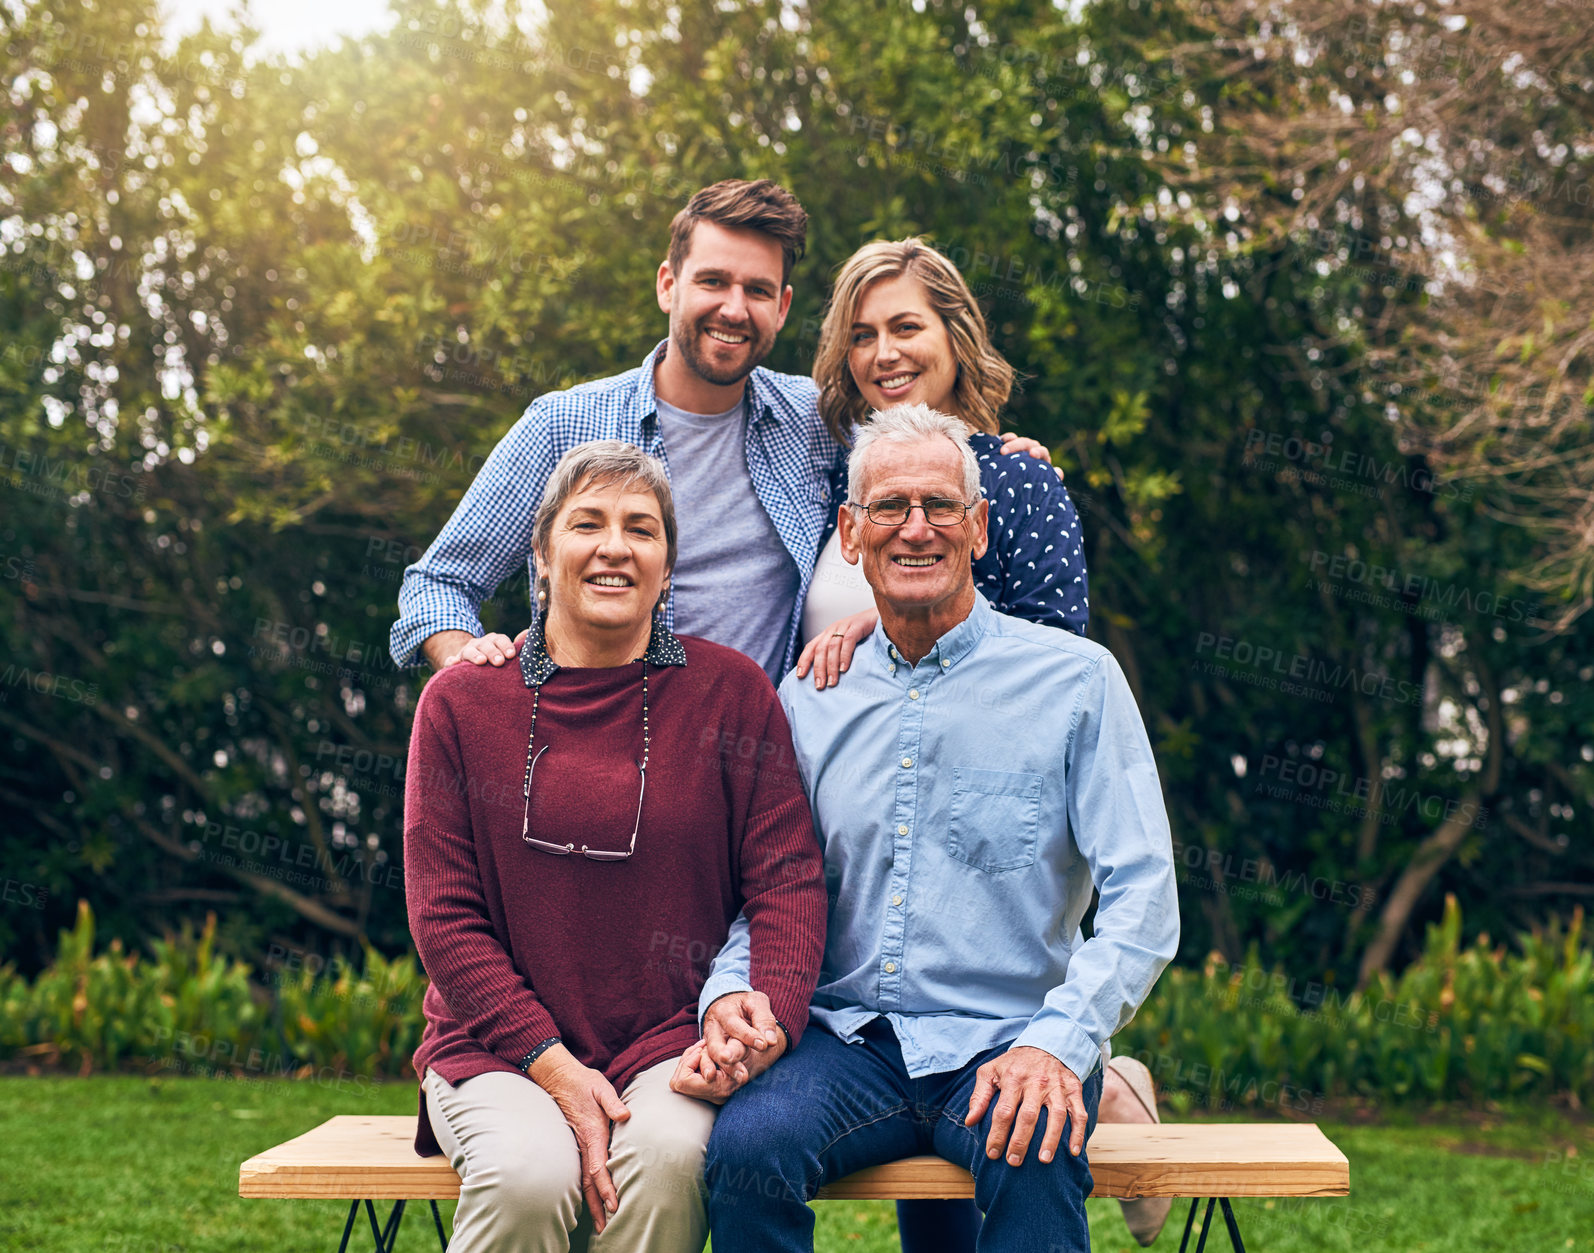 Buy stock photo Shot of a family outside